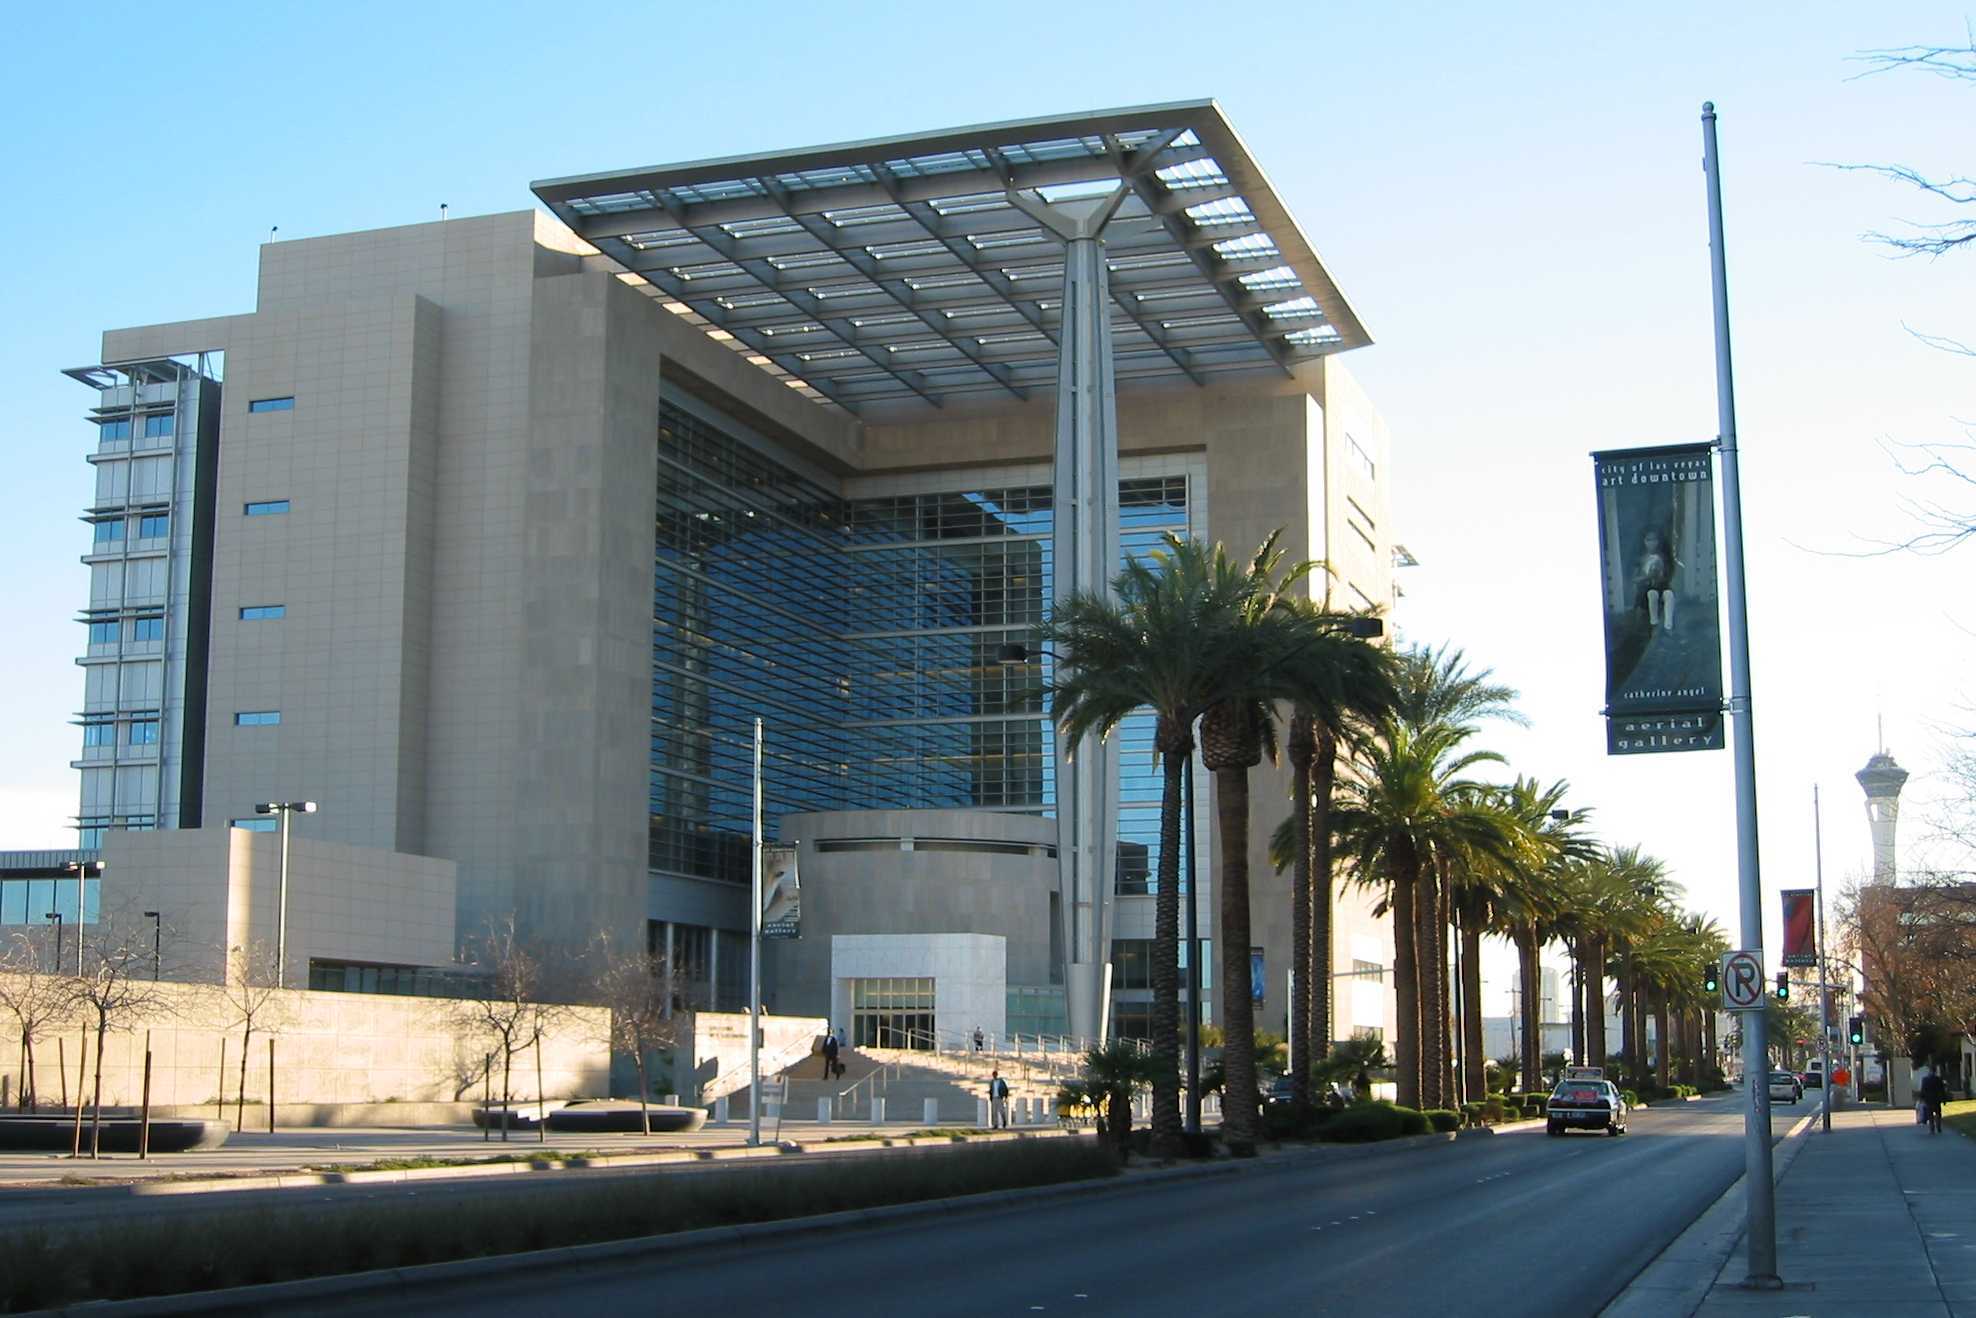 The building of Lloyd D. George - U.S. Federal Courthouse in Las Vegas, Nevada